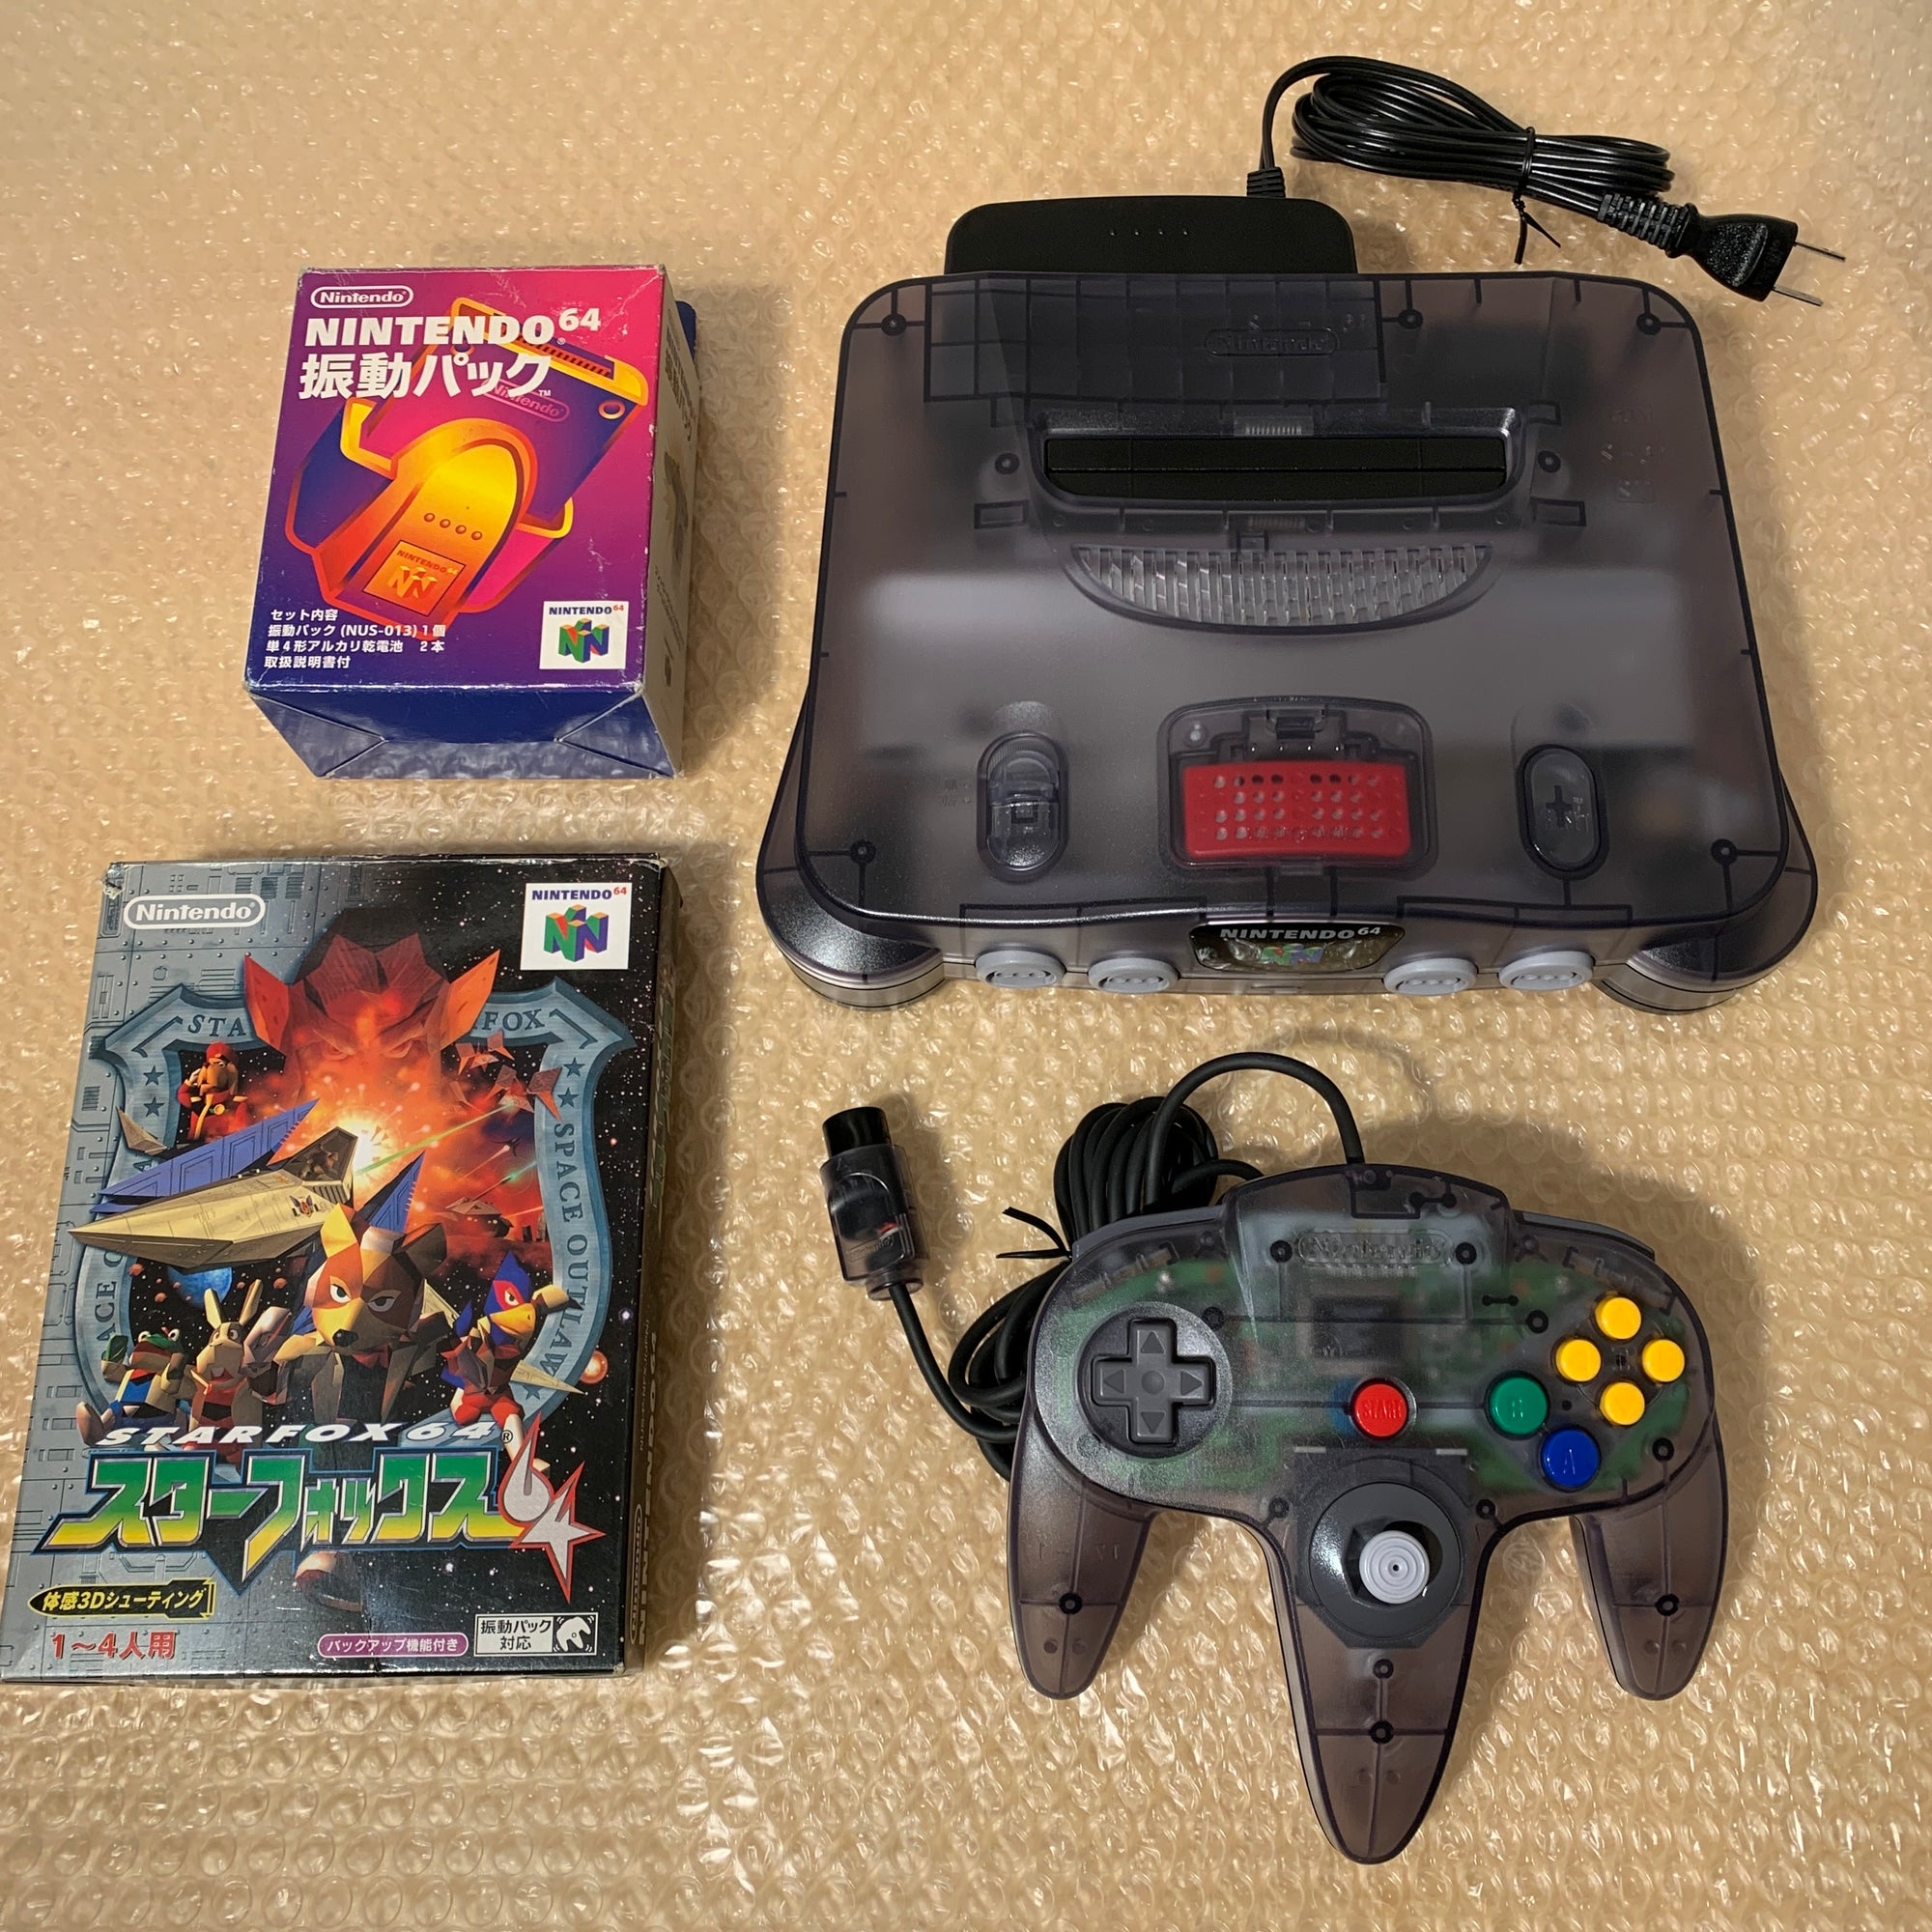 Clear Black Nintendo 64 set with PixelFX GEM kit - compatible with JP and US games